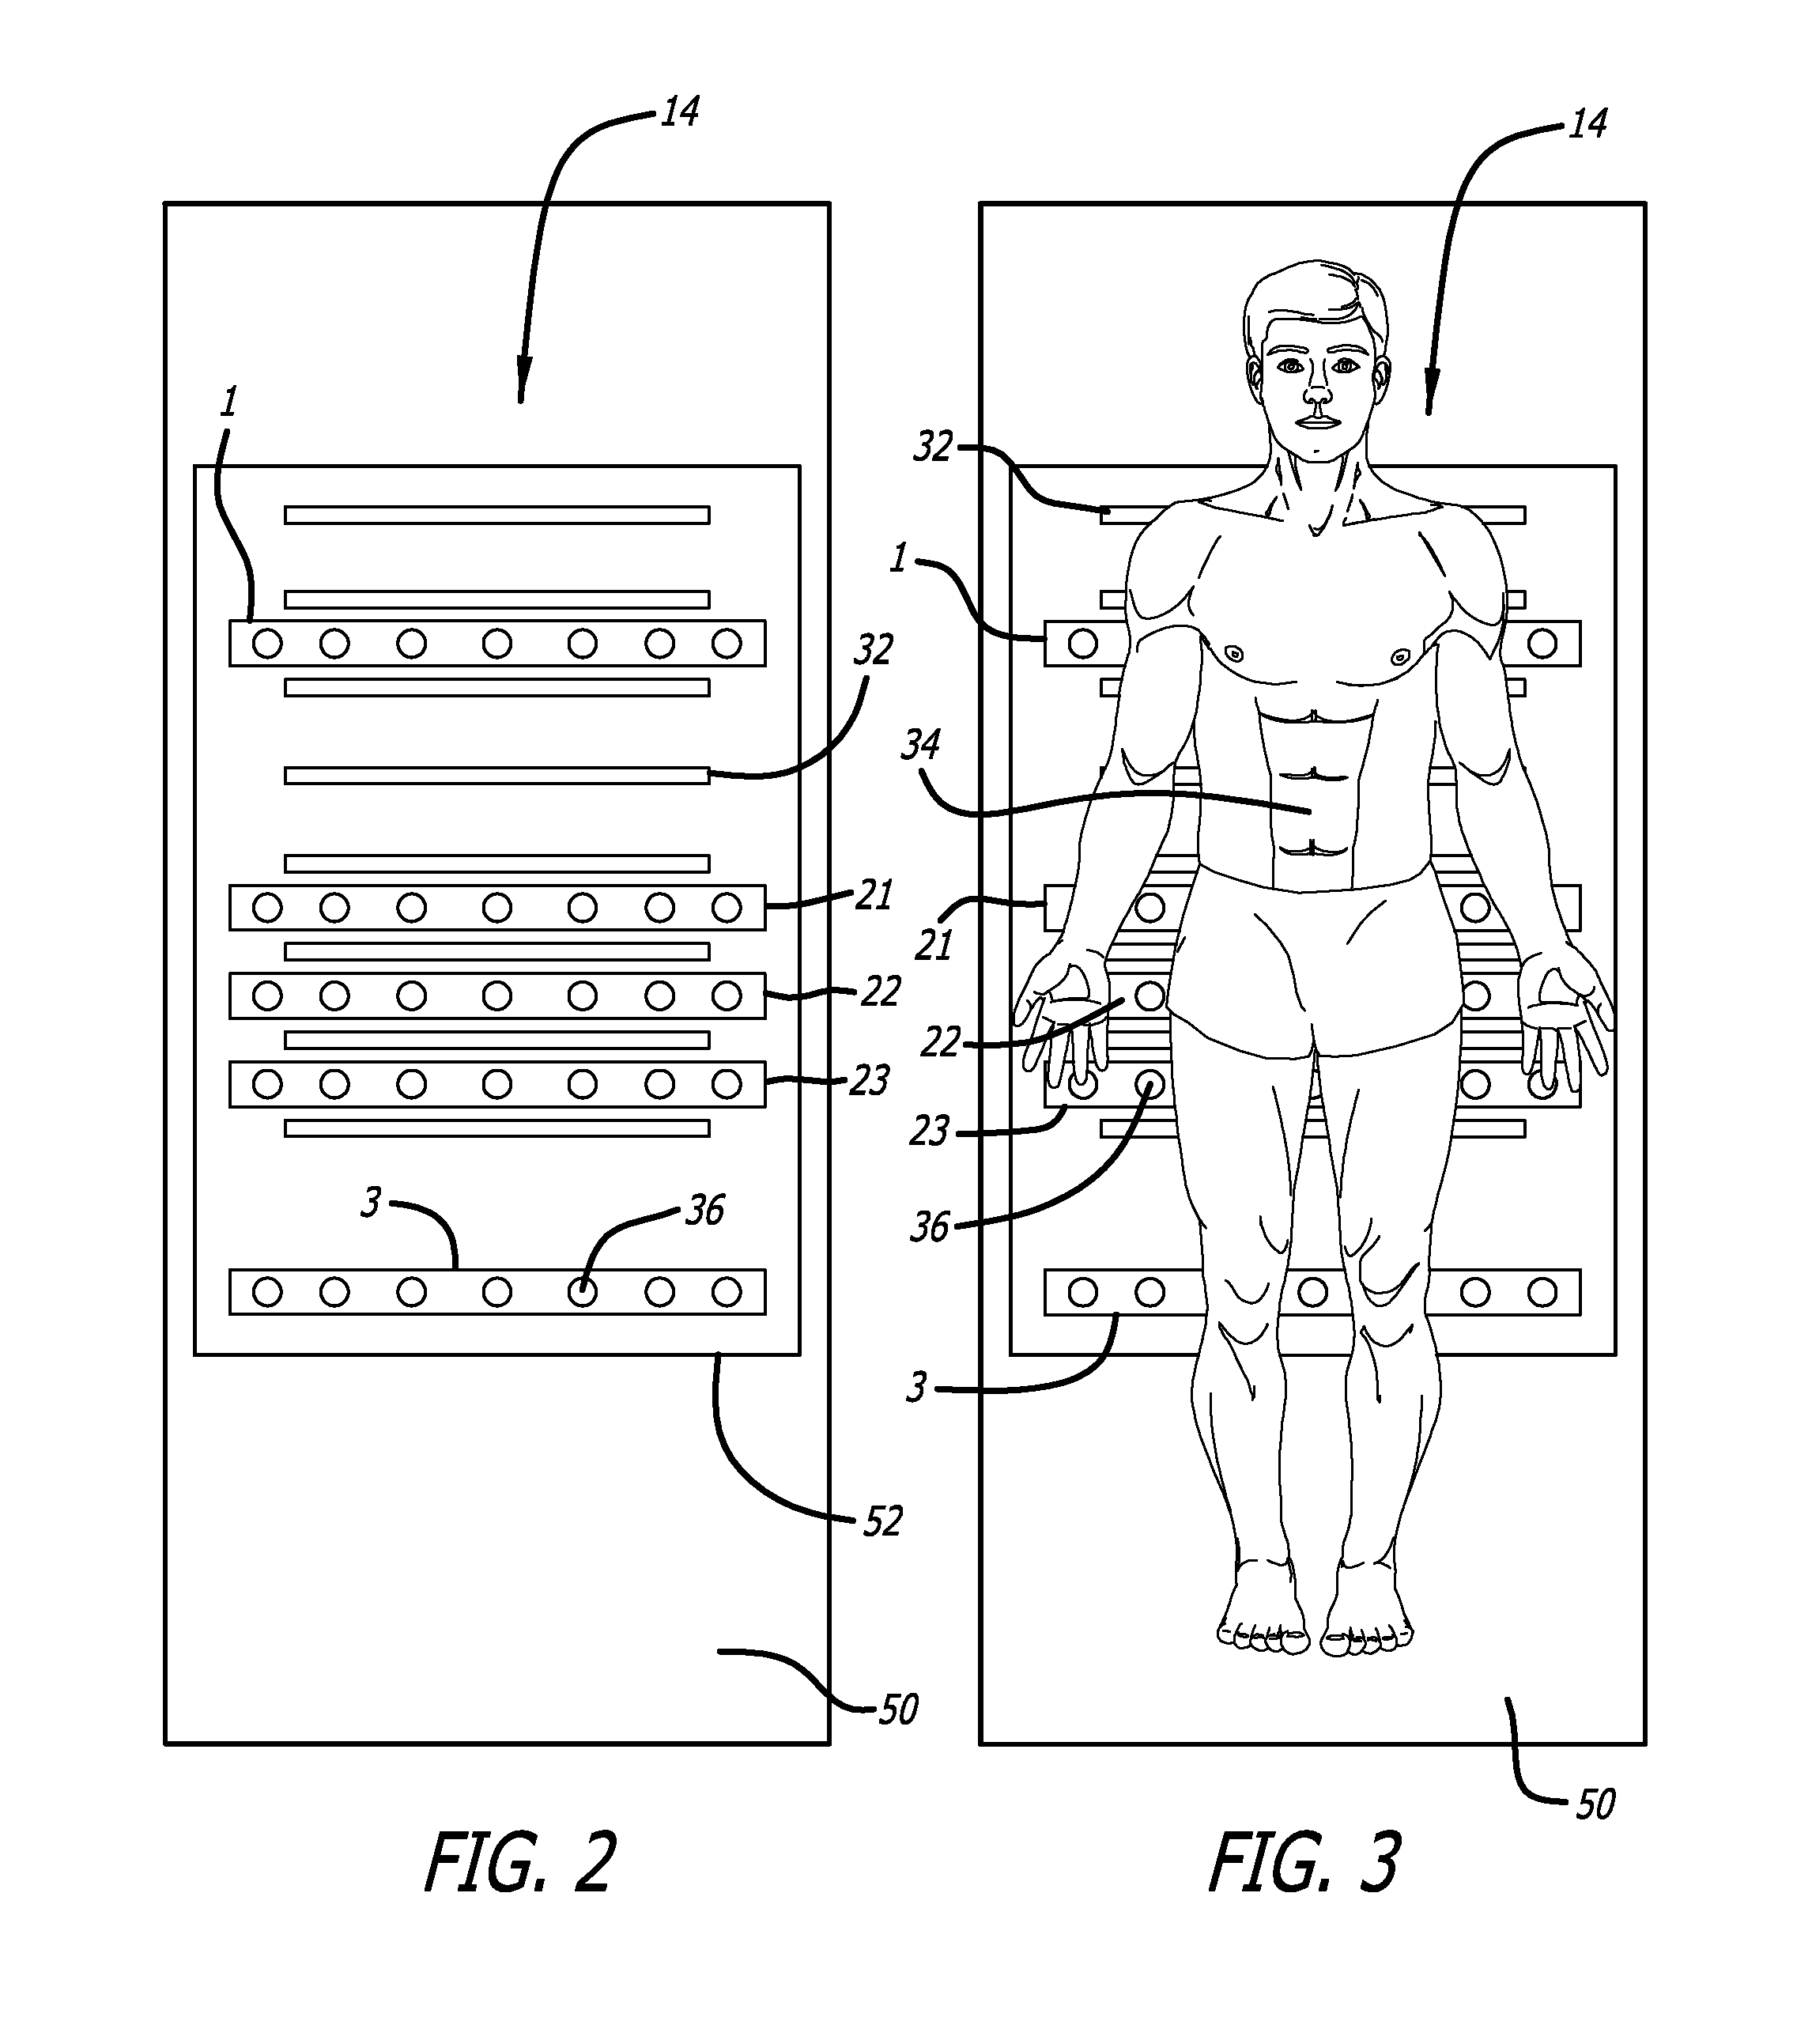 Bed exit and patient detection system